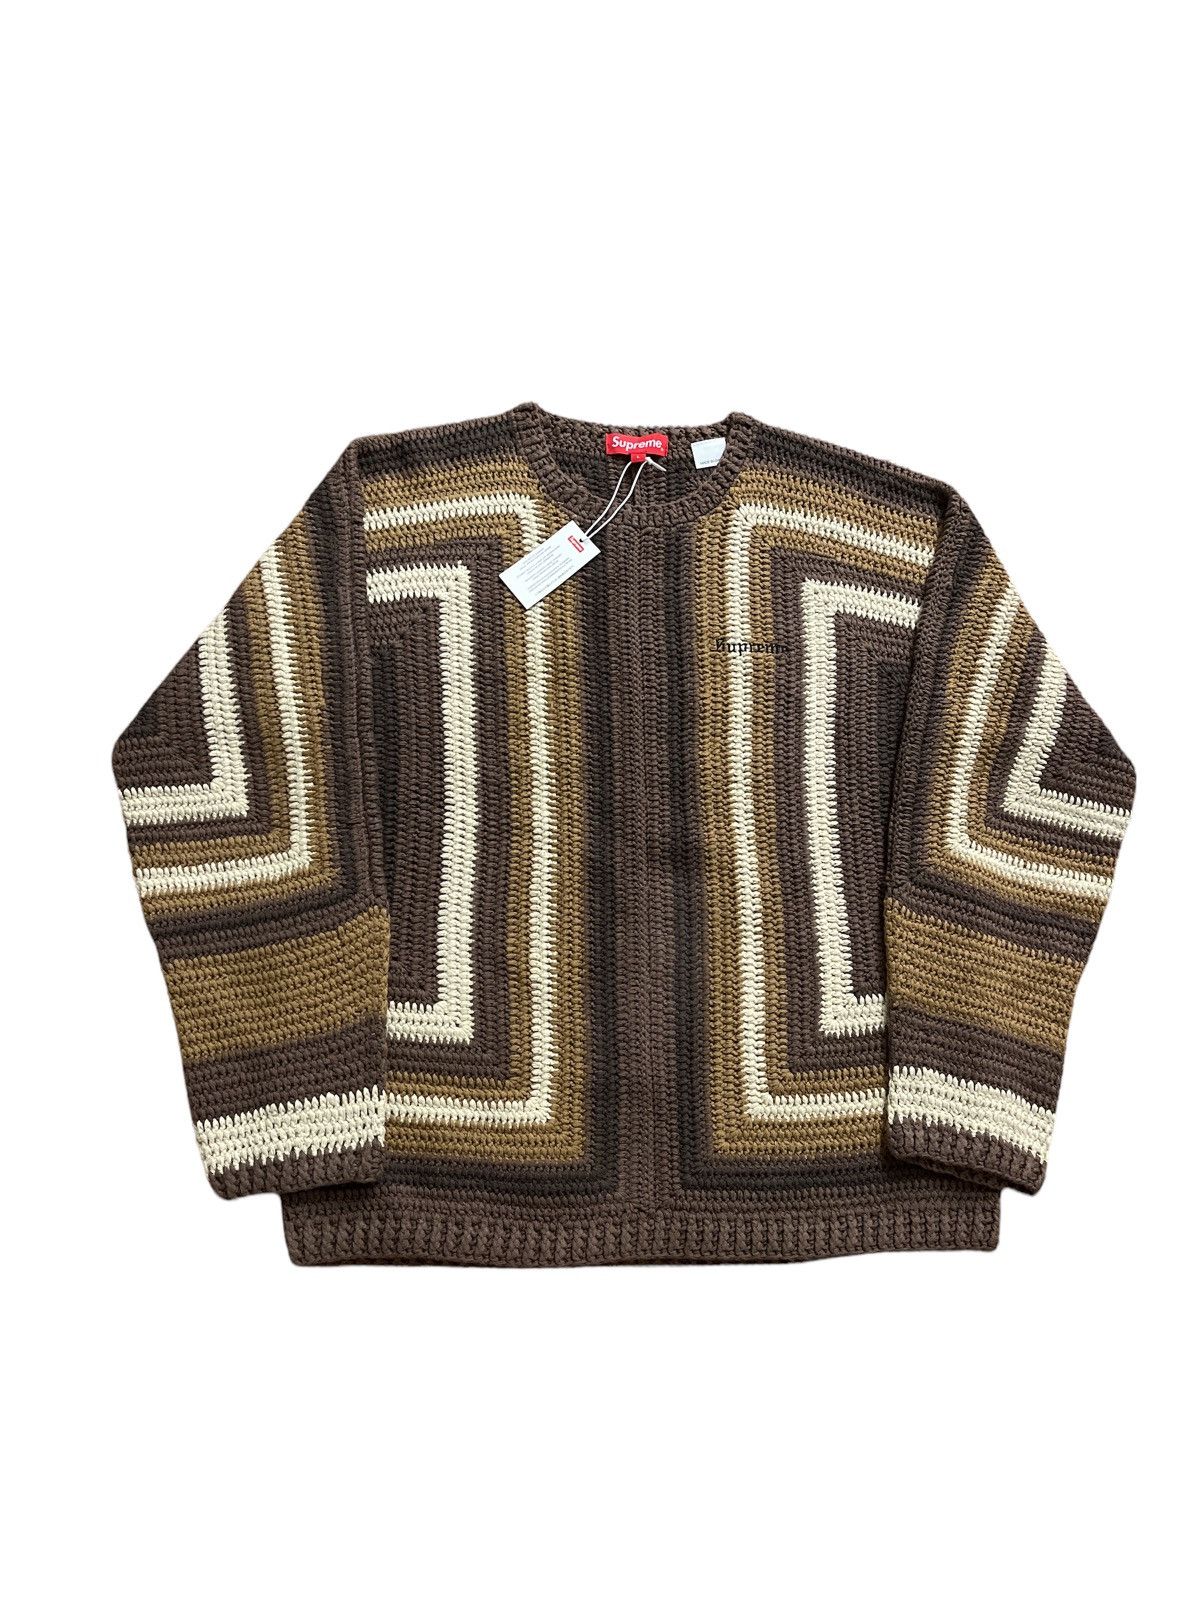 SUPREME HAND CROCHETED SWEATER BROWN M - トップス